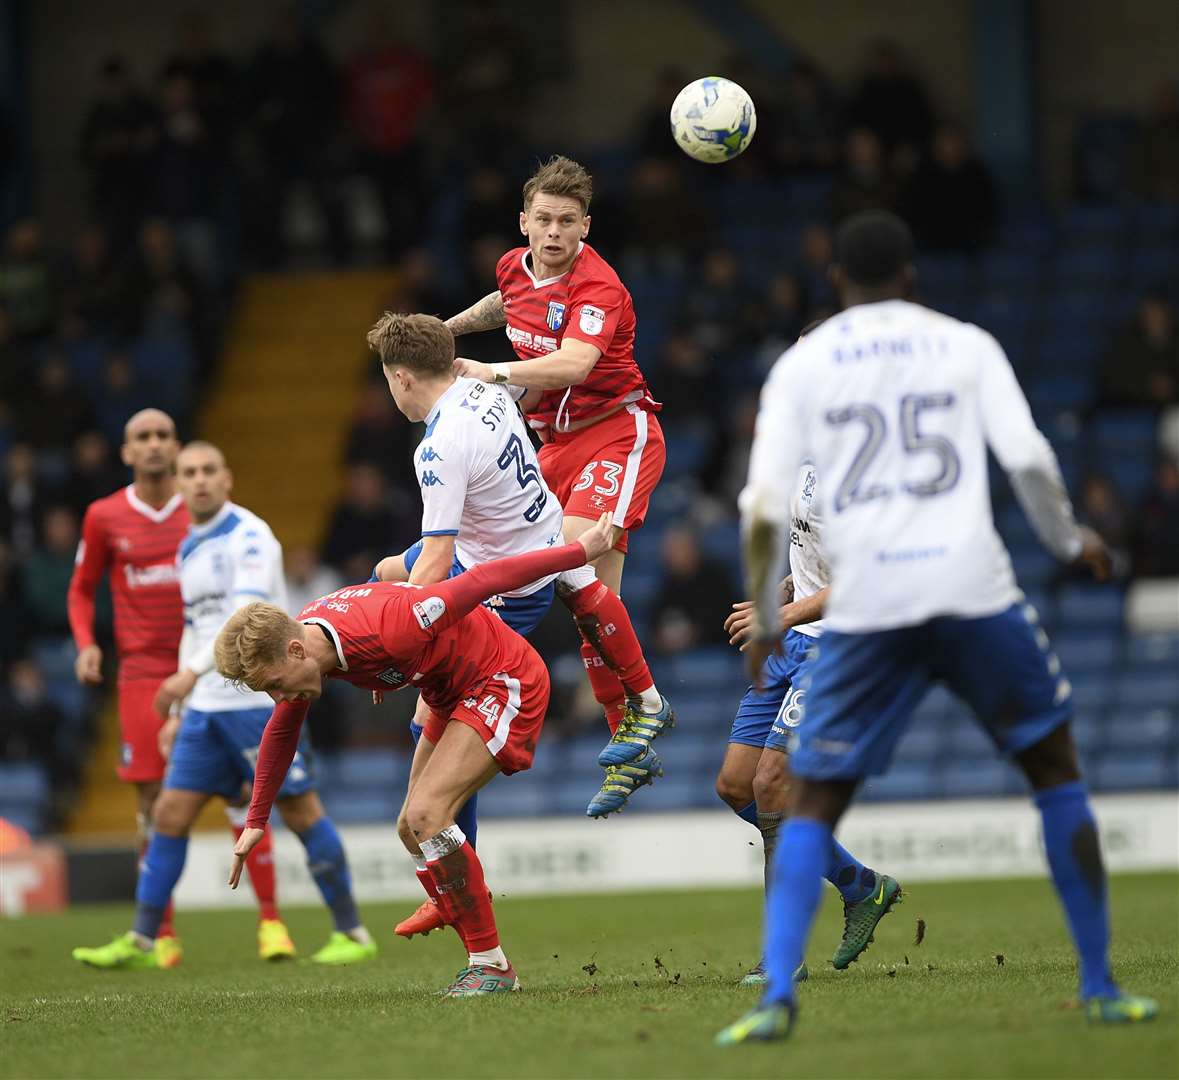 Mark Byrne in action at Gigg Lane during a match there in 2017